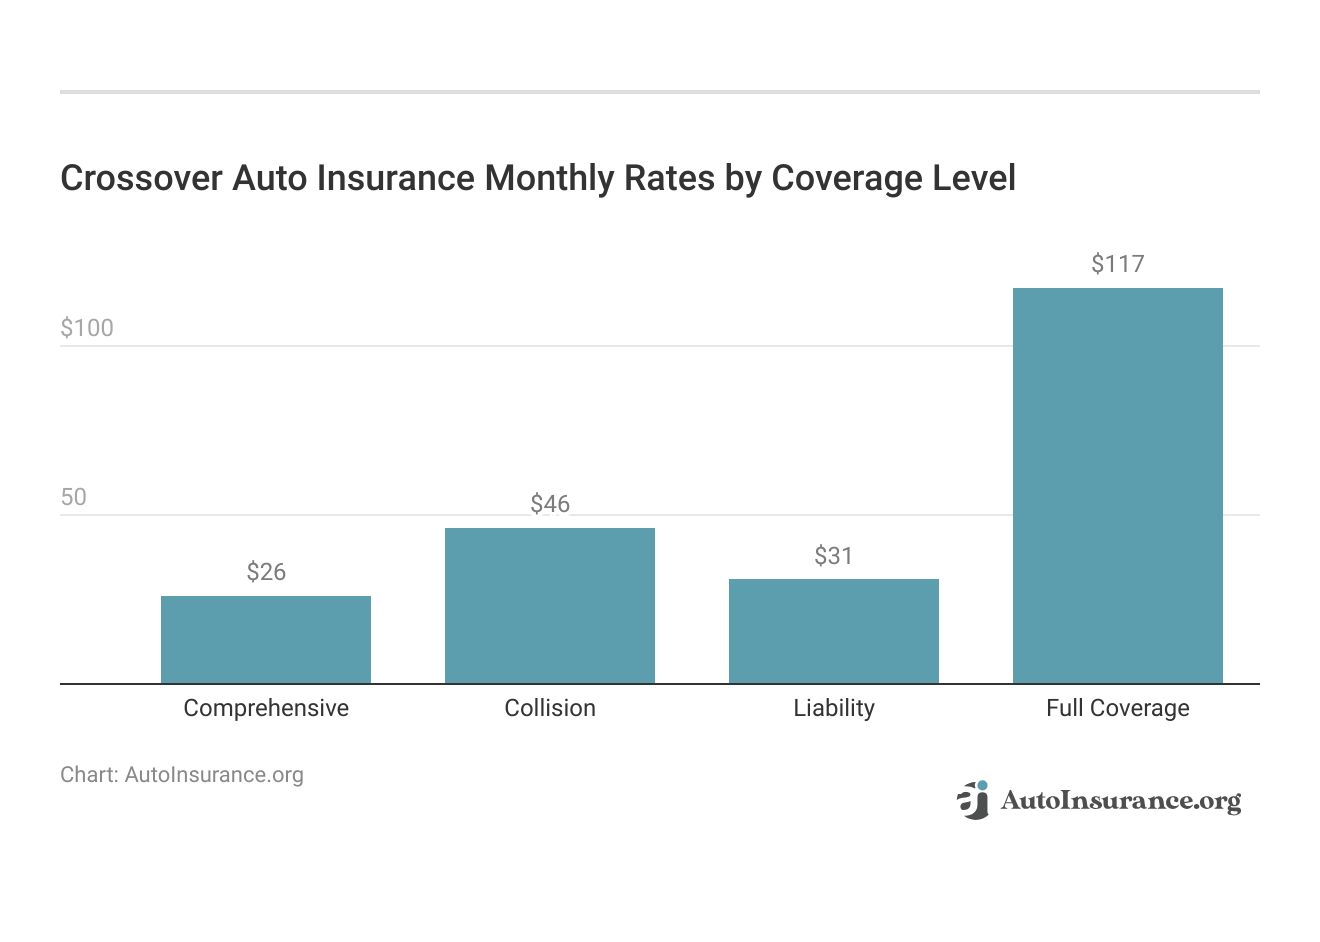 <h3>Crossover Auto Insurance Monthly Rates by Coverage Level</h3>